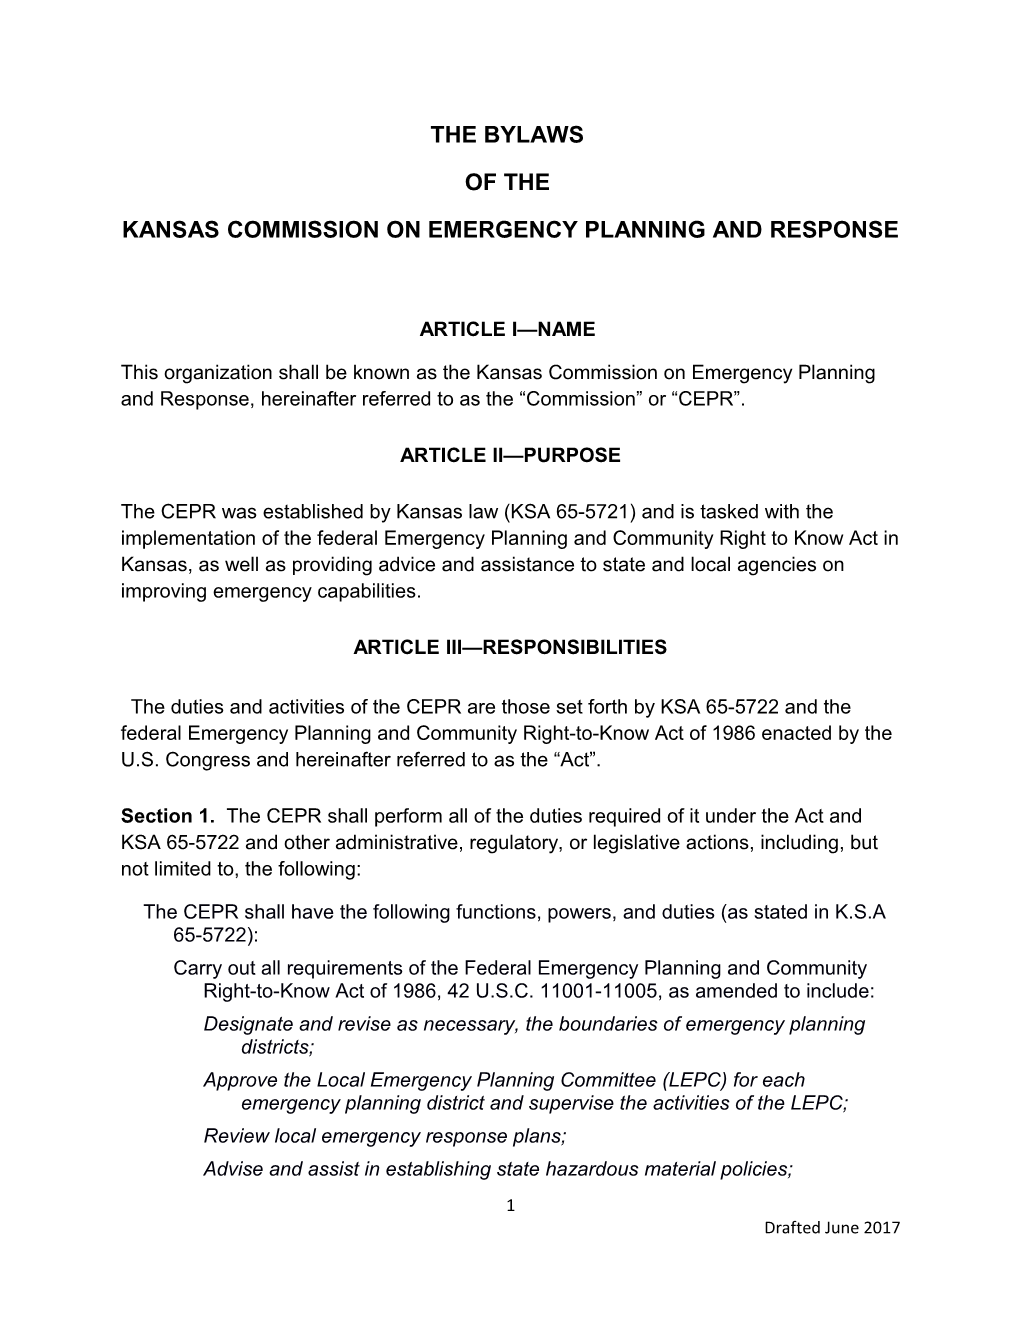 Kansas Commission on Emergency Planning and Response